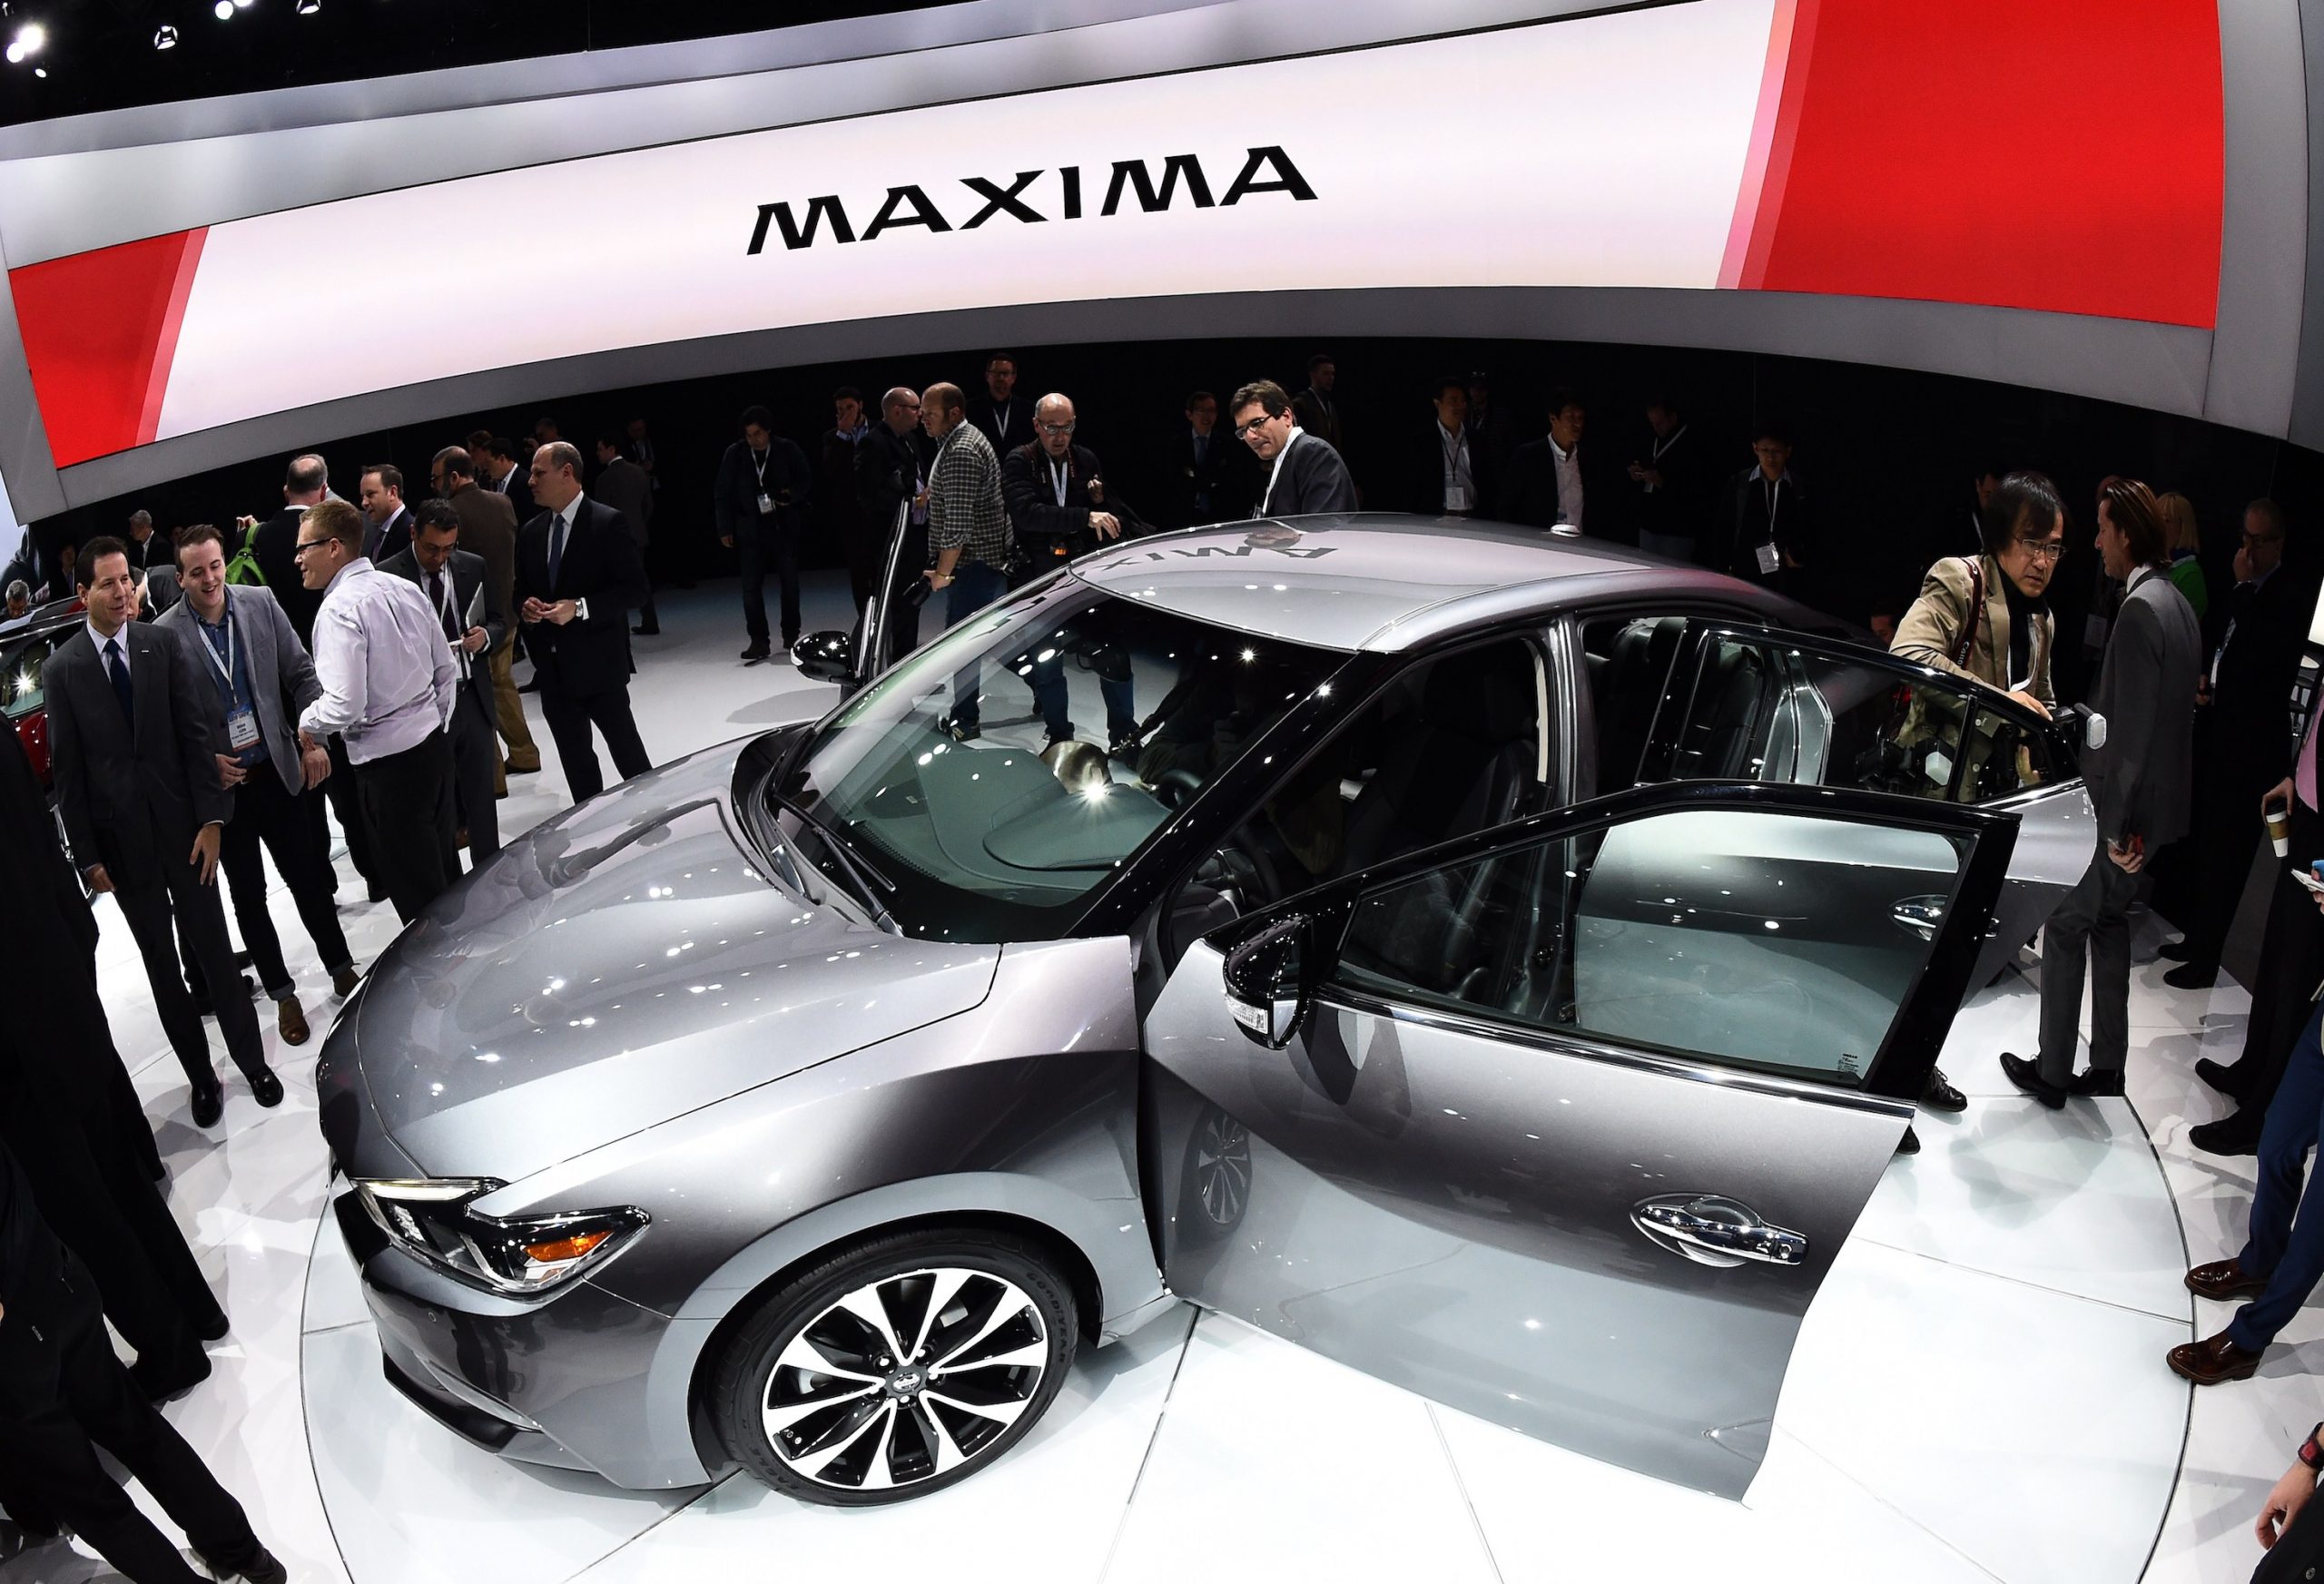 The 2016 Nissan Maxima Platinum is presented during the press preview of the 2015 New York International Auto Show at the Jacob Javits Center